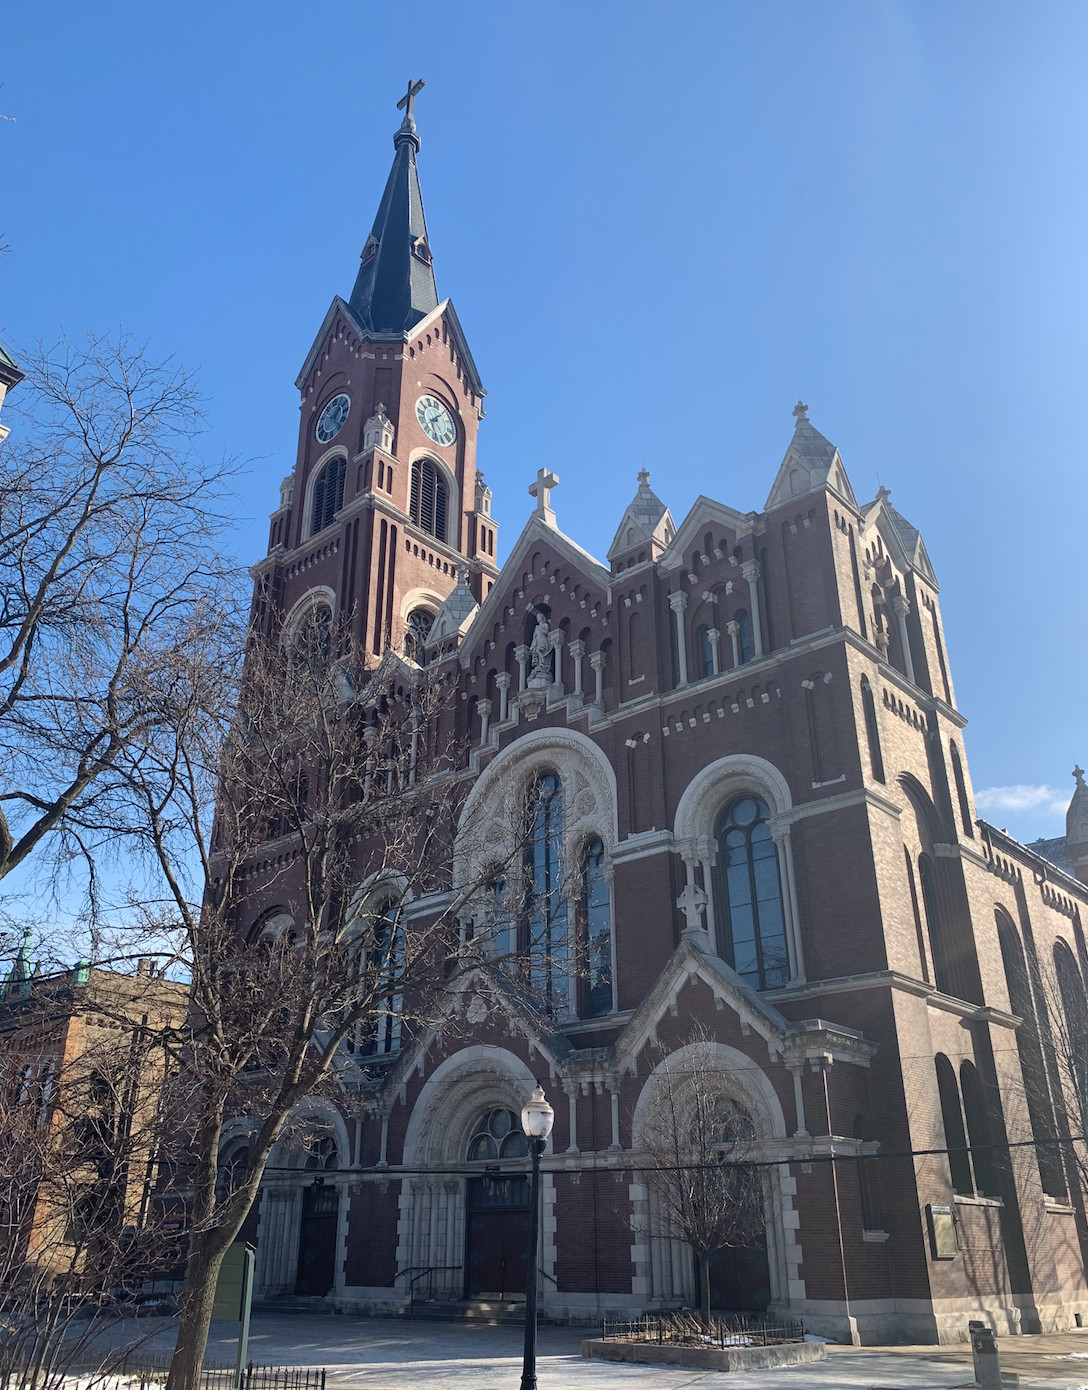 St. Michael Church in Old Town, where Donald F. Johnson attacked a female employee in 2018.